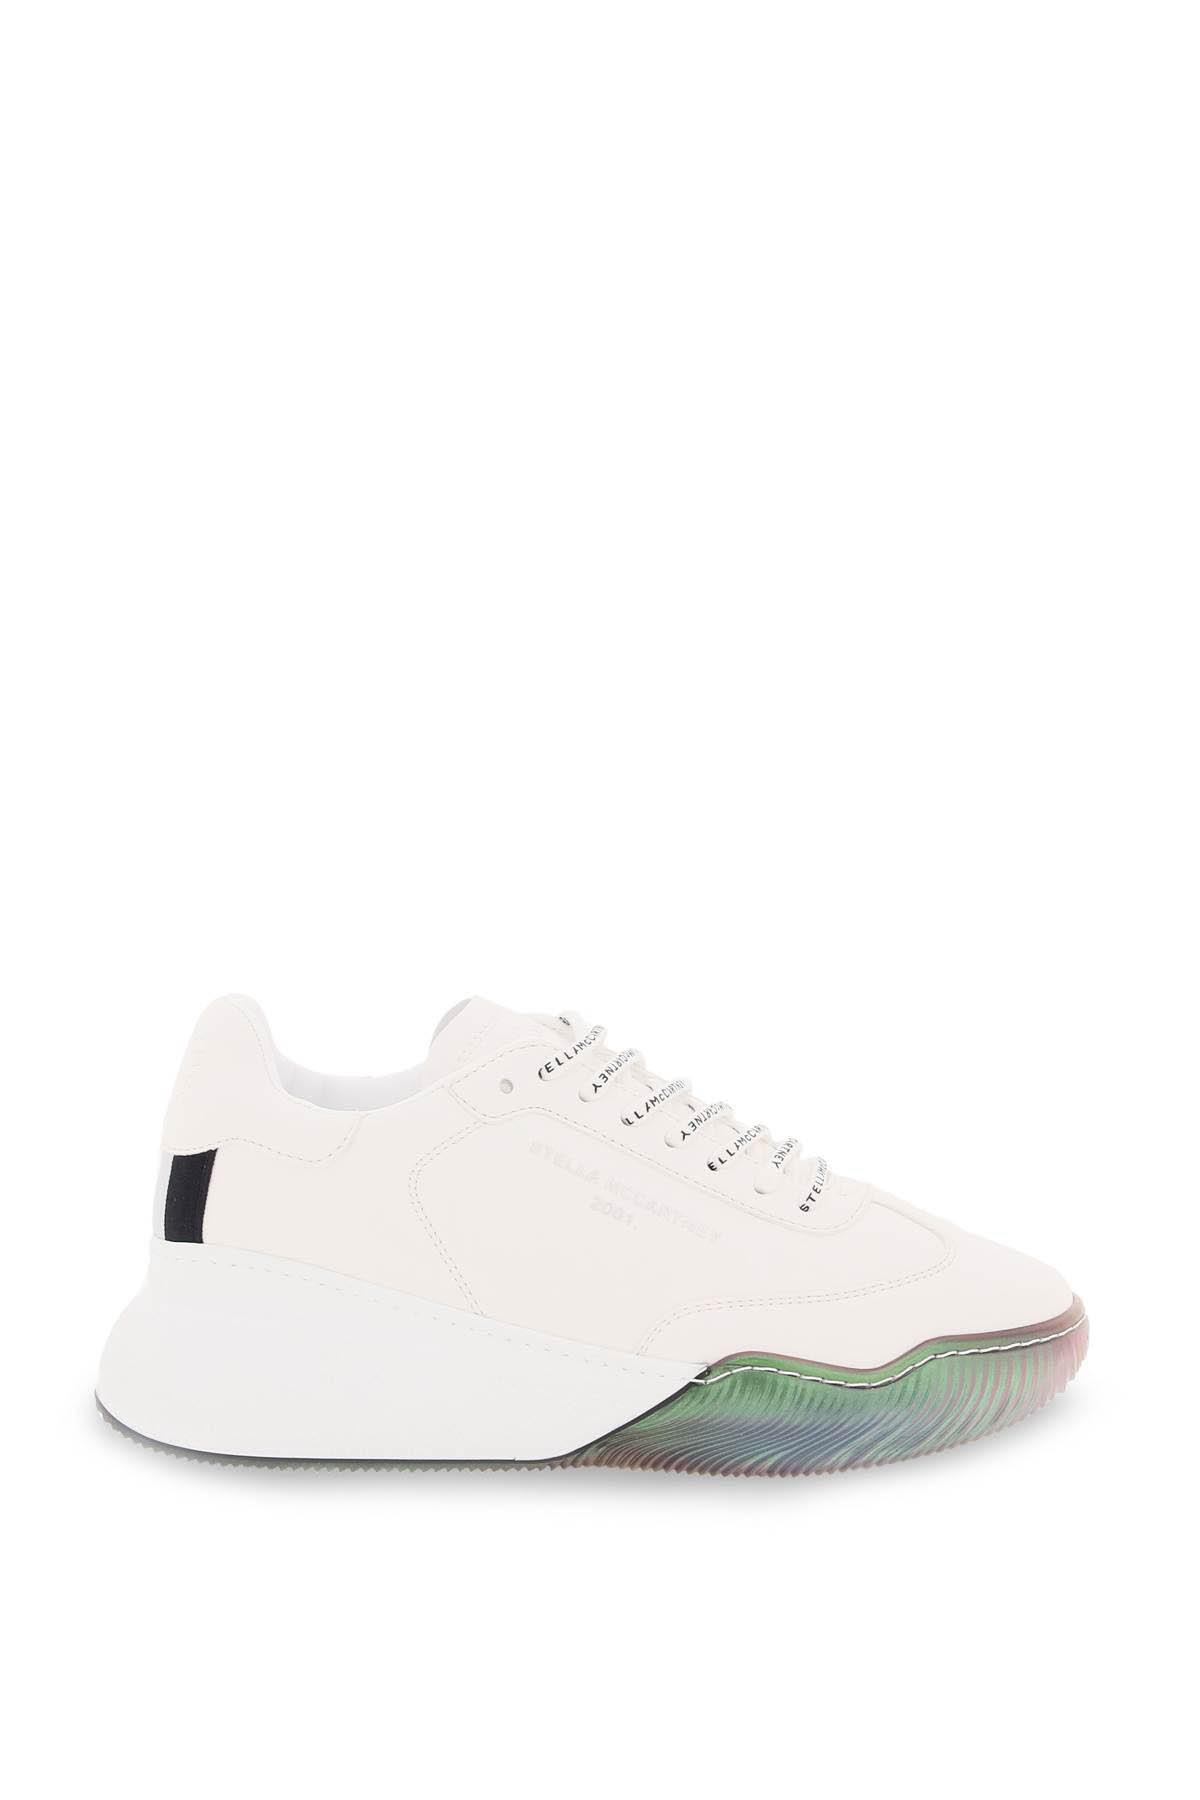 STELLA McCARTNEY FAUX LEATHER TRAINER SNEAKERS